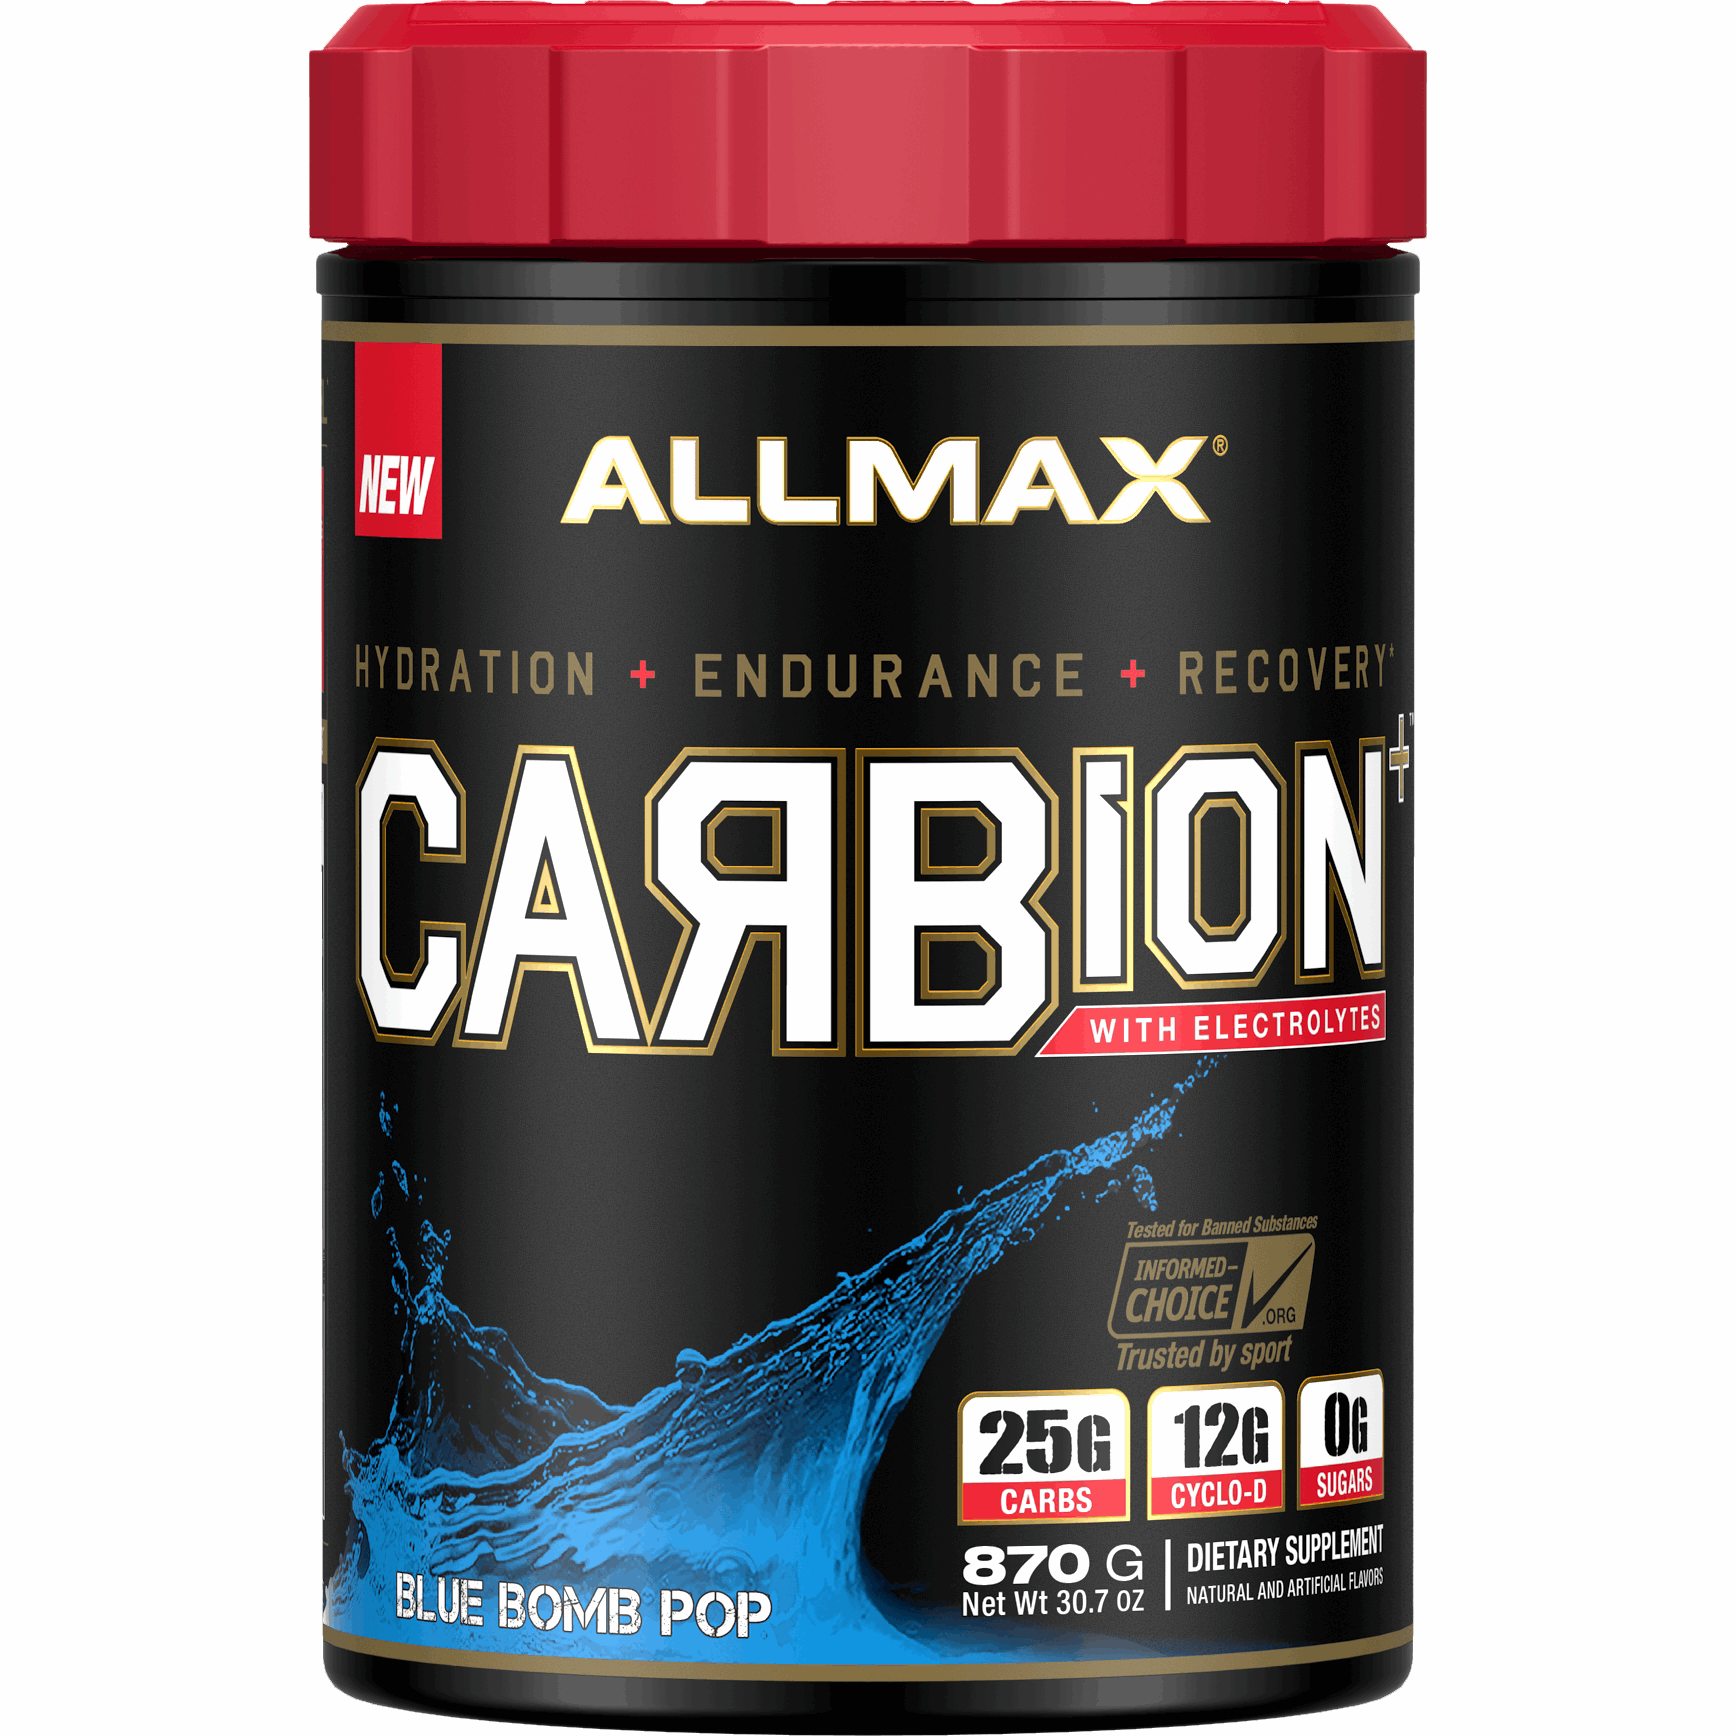 ALLMAX CARBION+Maximum Strength Electrolyte and Hydration Energy Drink (30 Servings) Carbohydrates Blue Bomb Pop Allmax Nutrition allmax-carbion-maximum-strength-electrolyte-and-hydration-energy-drink-30-servings